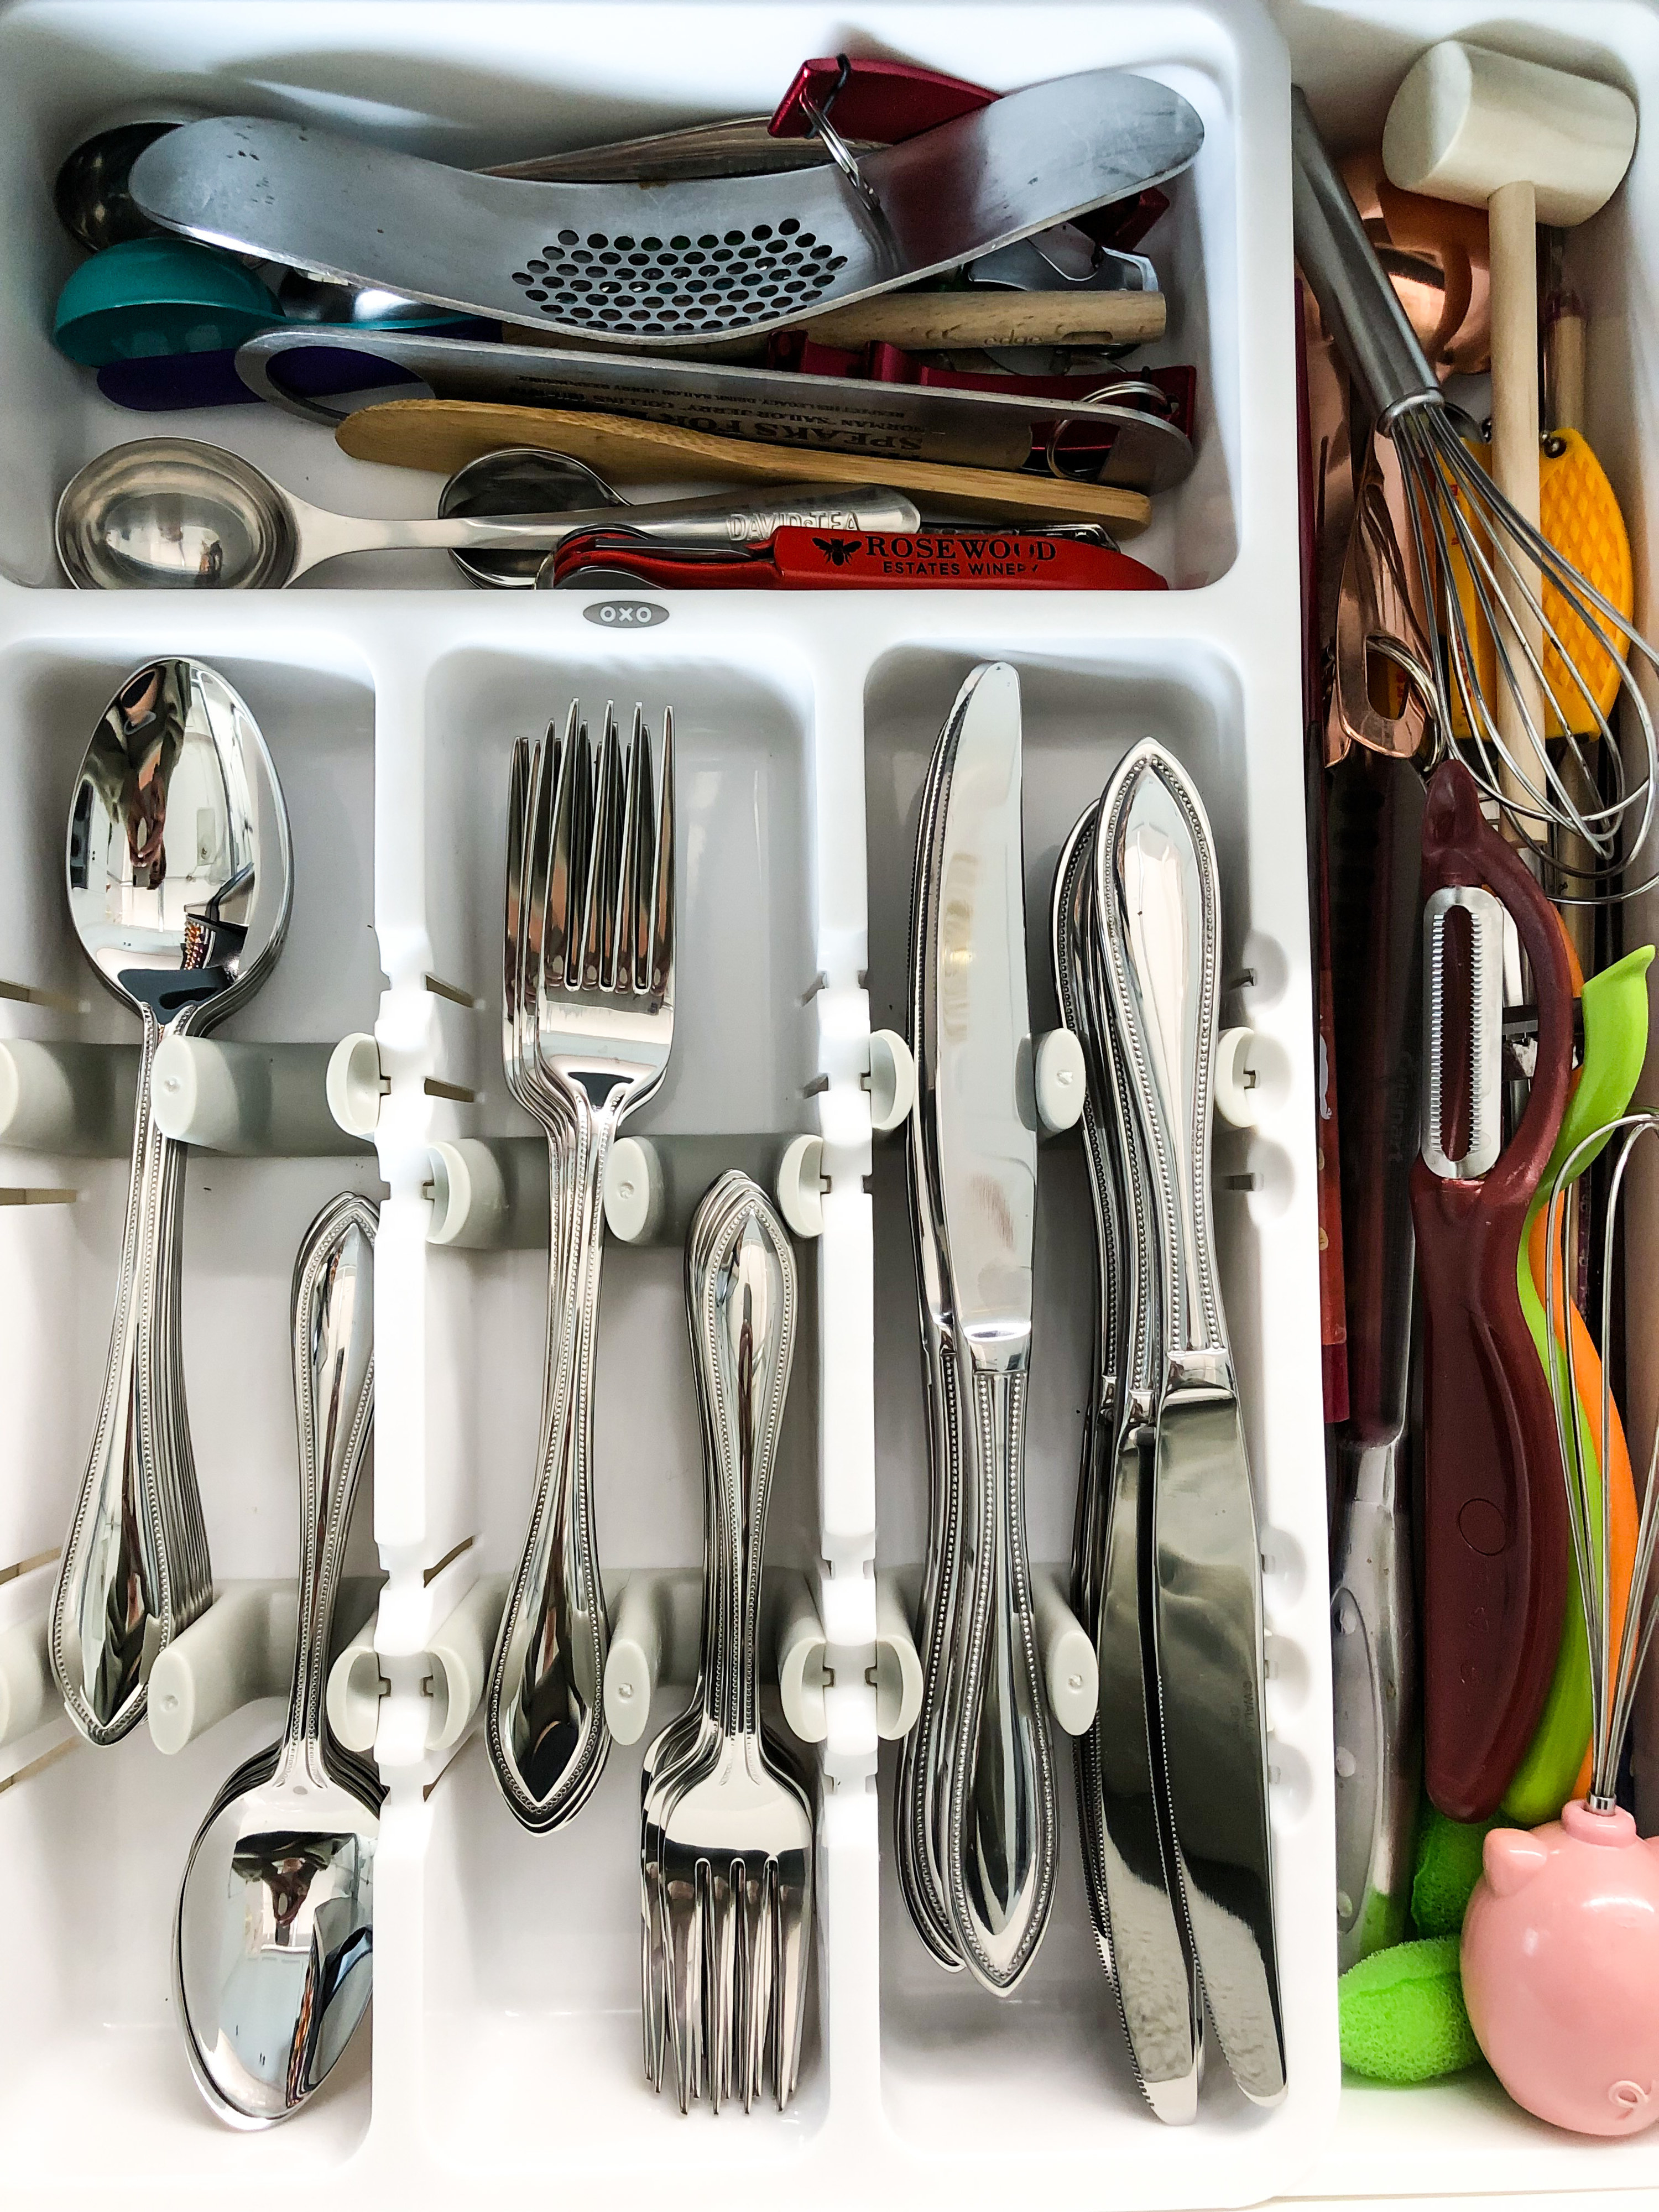 A top-down view of the cutlery organizer; all the forks and knives are neatly arranged